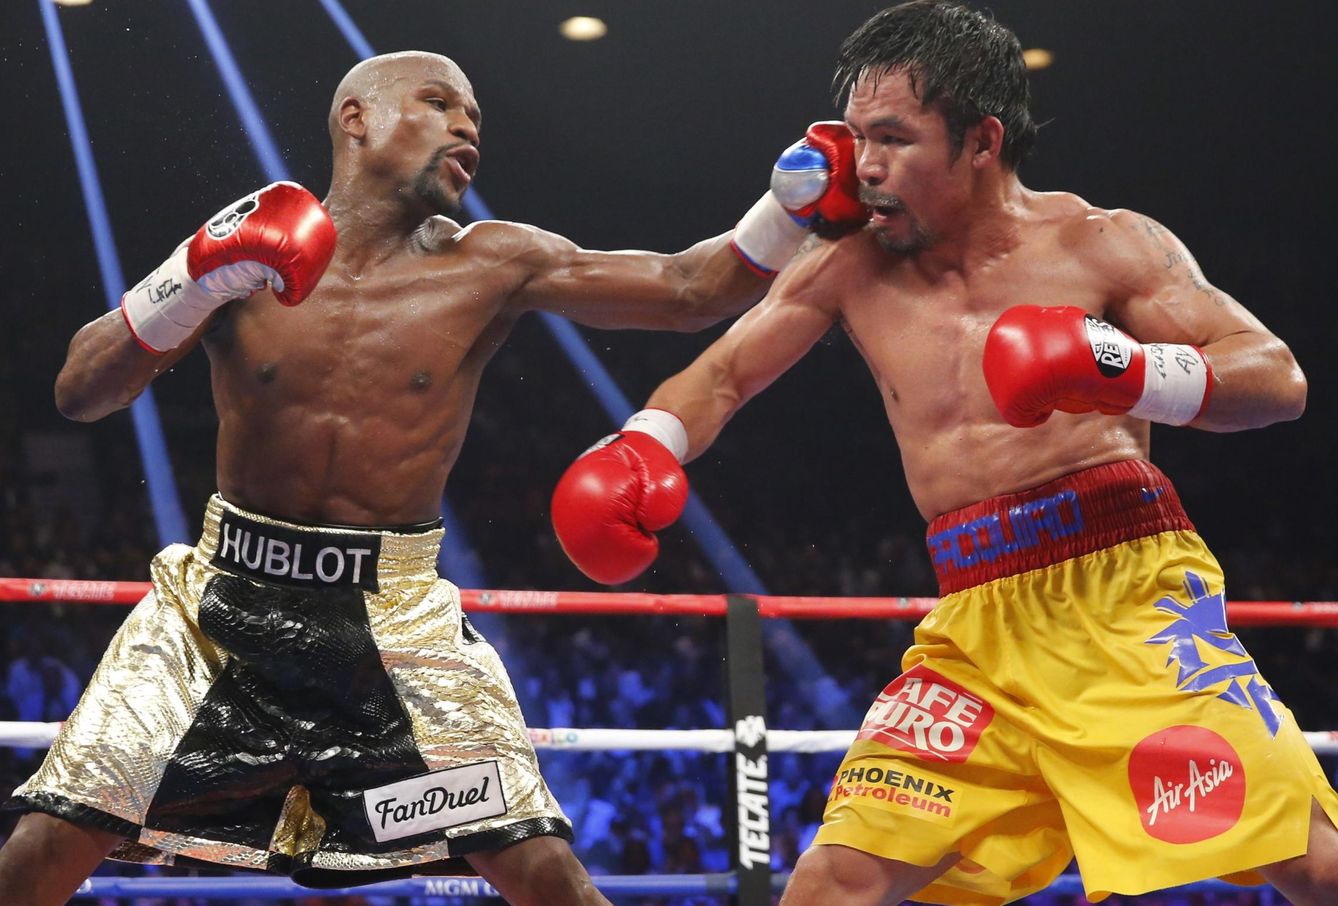 Floyd Mayweather, Jr. (L) of the U.S. lands a left to the face of Manny Pacquiao of the Philippines in the 11th round during their welterweight WBO, WBC and WBA title fight in Las Vegas, Nevada, in this May 2, 2015 file photo.  Boxers Mayweather and Pacquiao topped Forbes 2015 list of the world's highest-paid celebrities June 29, 2015, thanks to their record-breaking lucrative Las Vegas fight that assured them earnings that surpassed those of musicians and actors.  REUTERS/Steve Marcus/Files